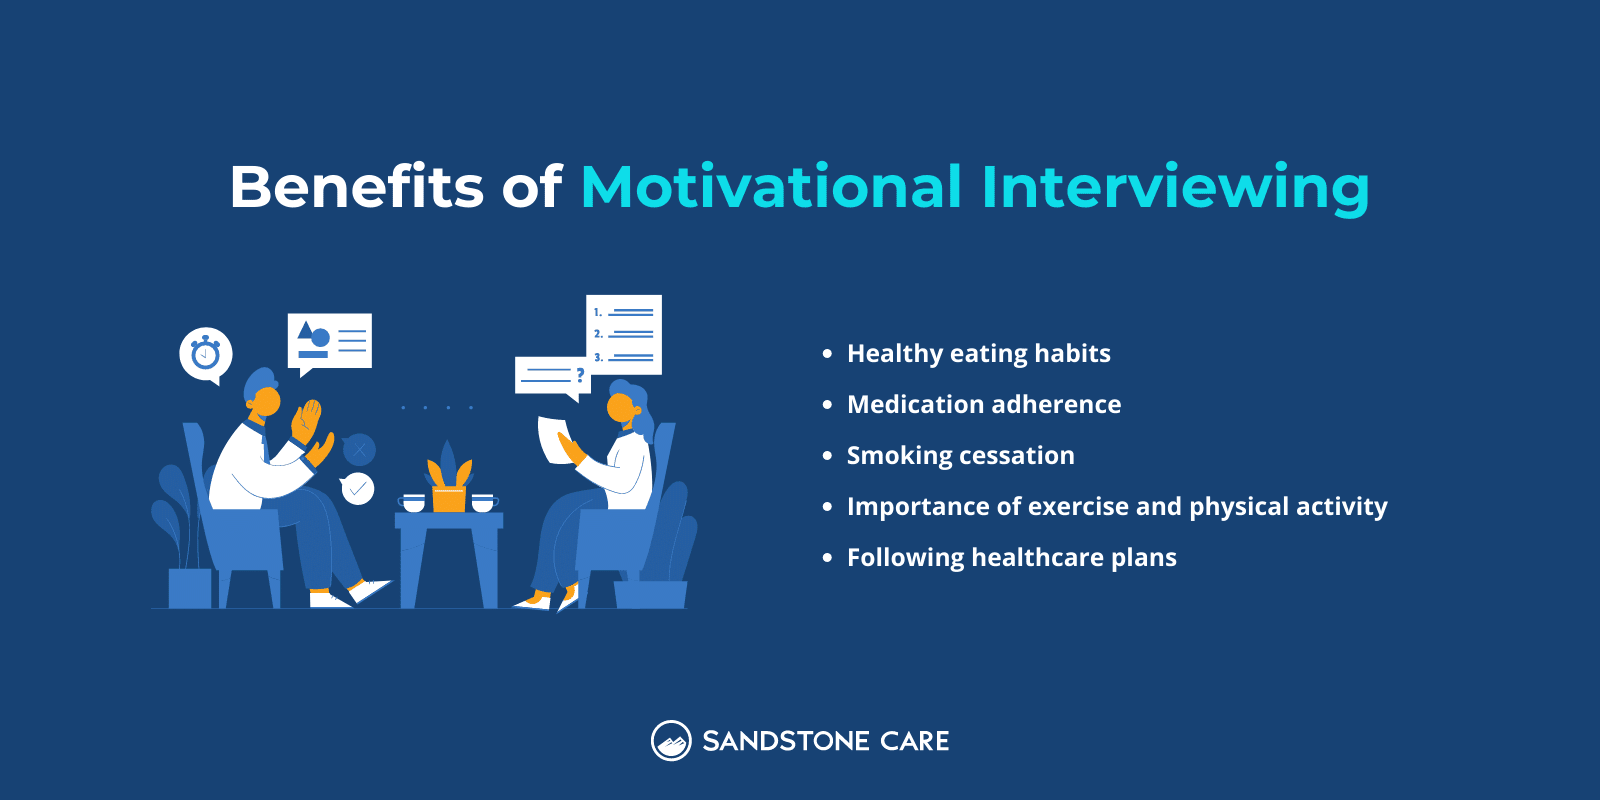 Benefits of Motivational Interviewing Infographic with a counseling session illustration and list of benefits